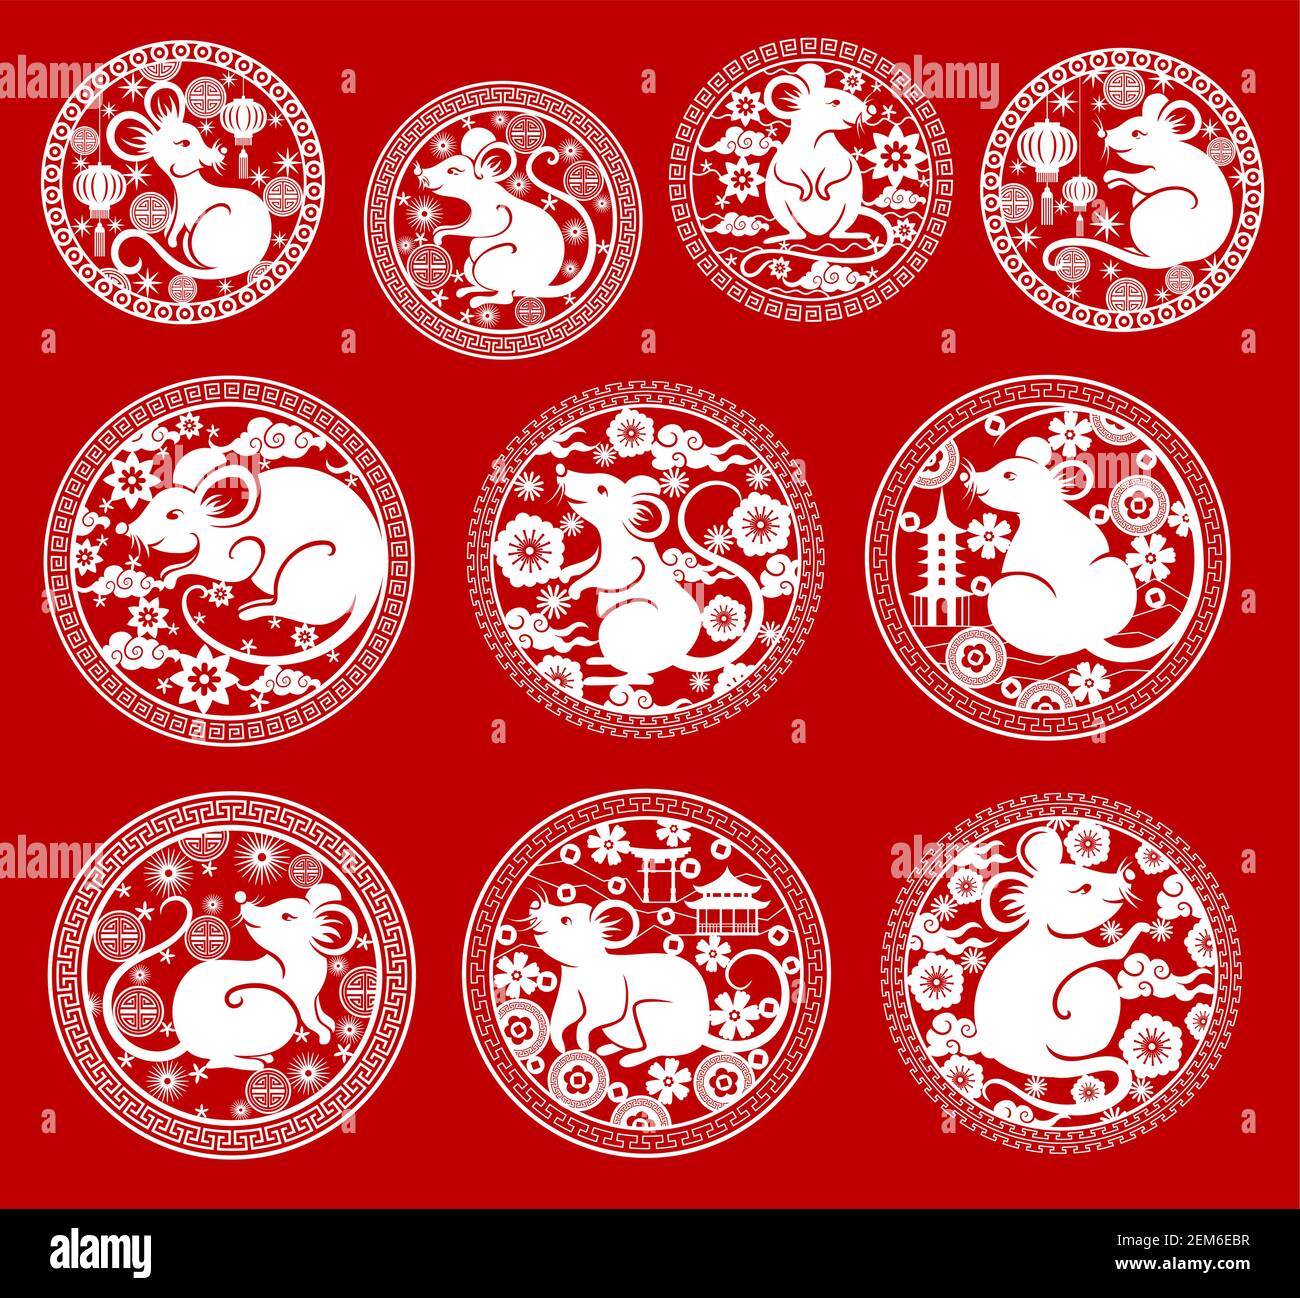 Chinese new year red symbols and icons collection Vector Image